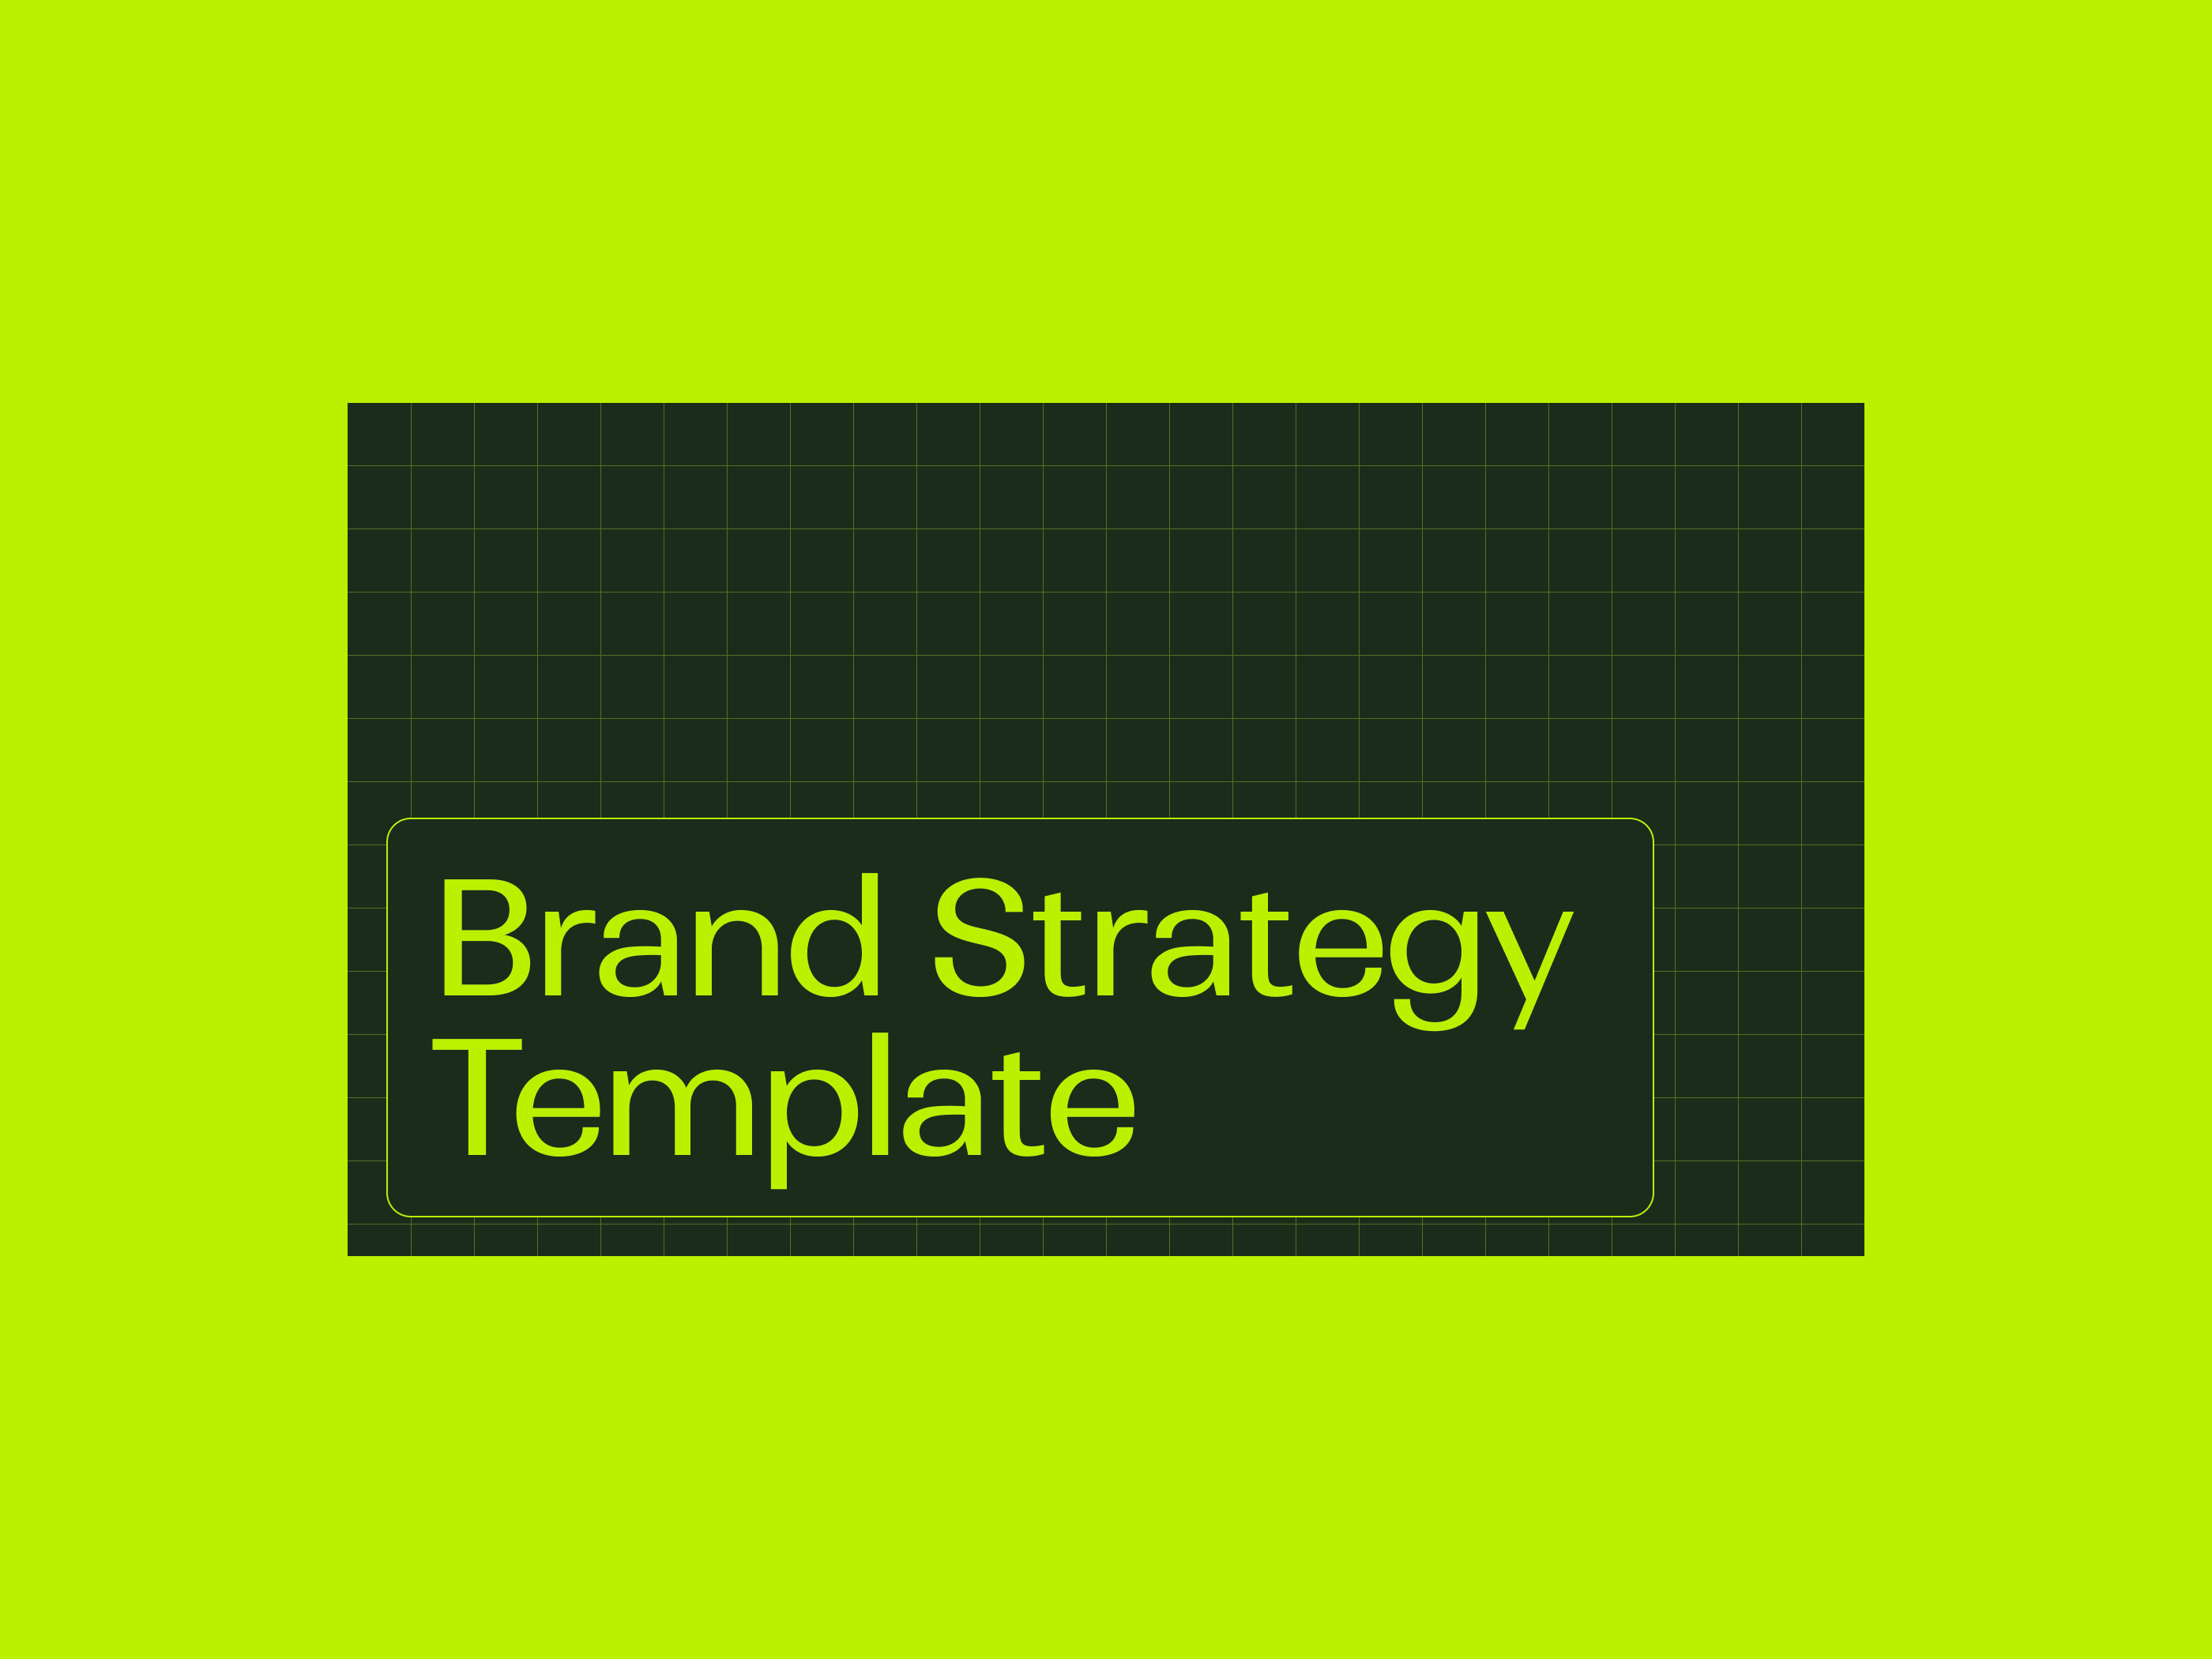 Brand Strategy Template brand strategy doc brand strategy template brand template branding branding and identity design document freelance document identity identity branding logo design logo design branding logotype